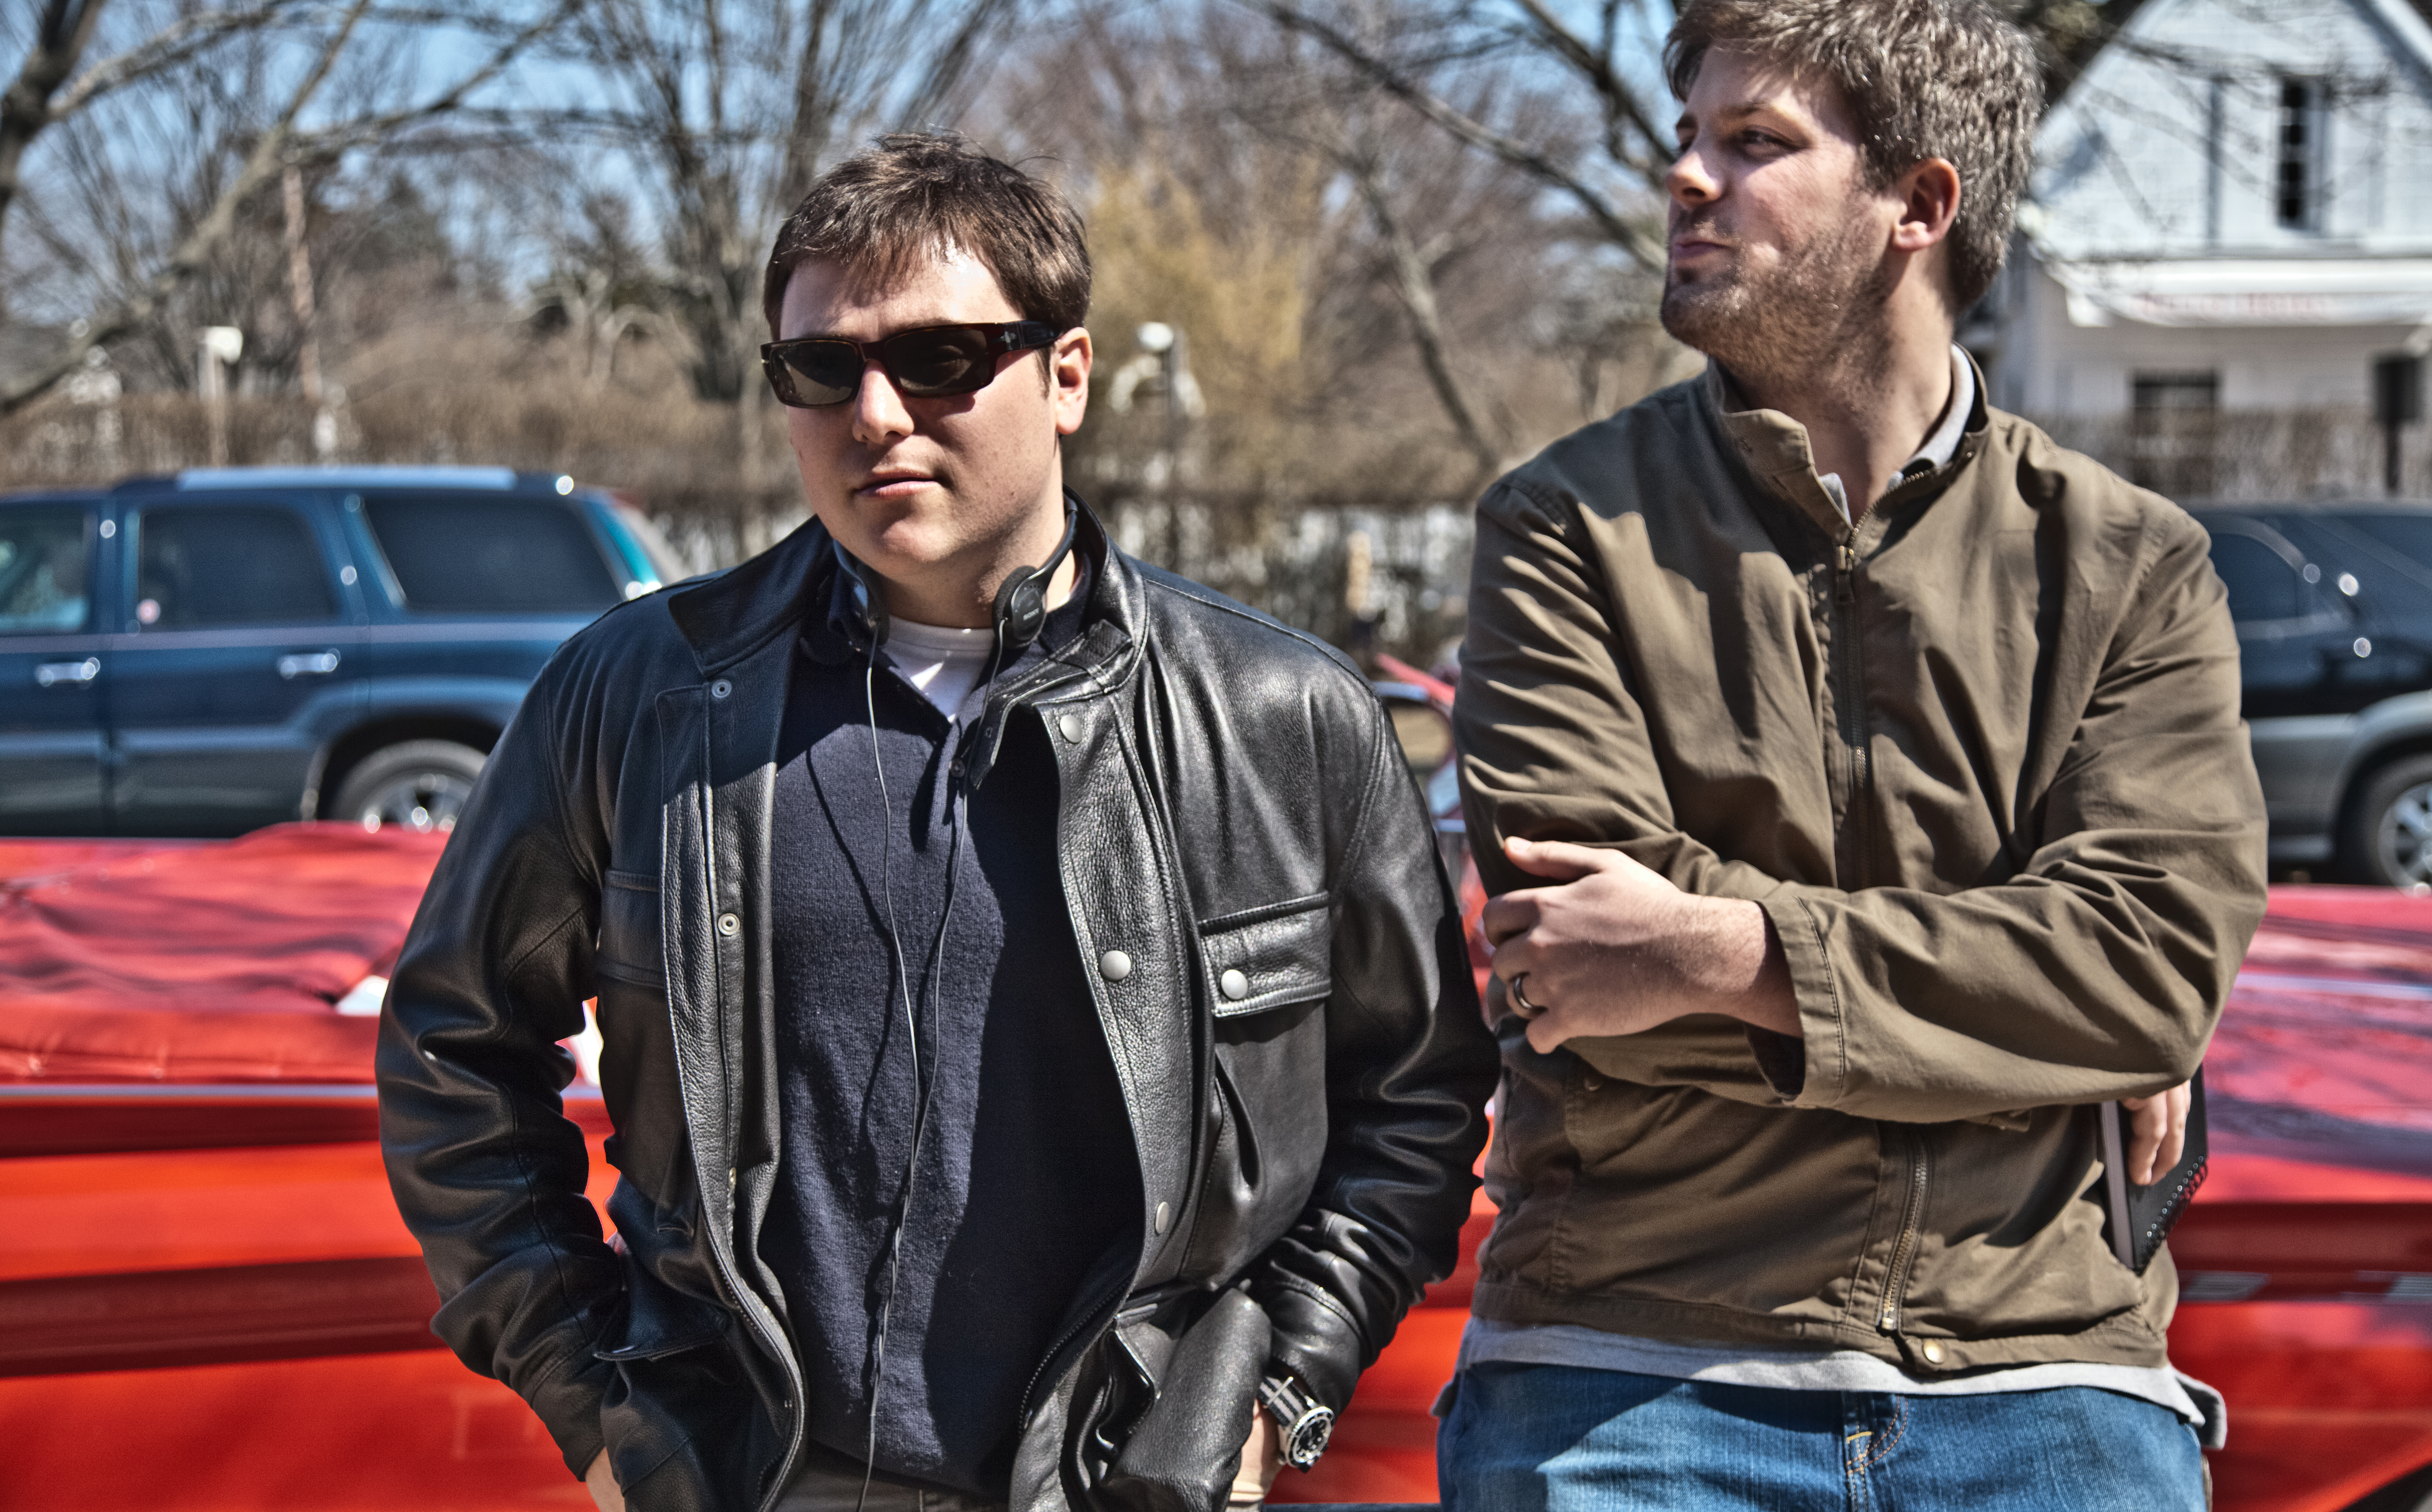 Jack Heller and Dallas Sonnier on set of ENTER NOWHERE.